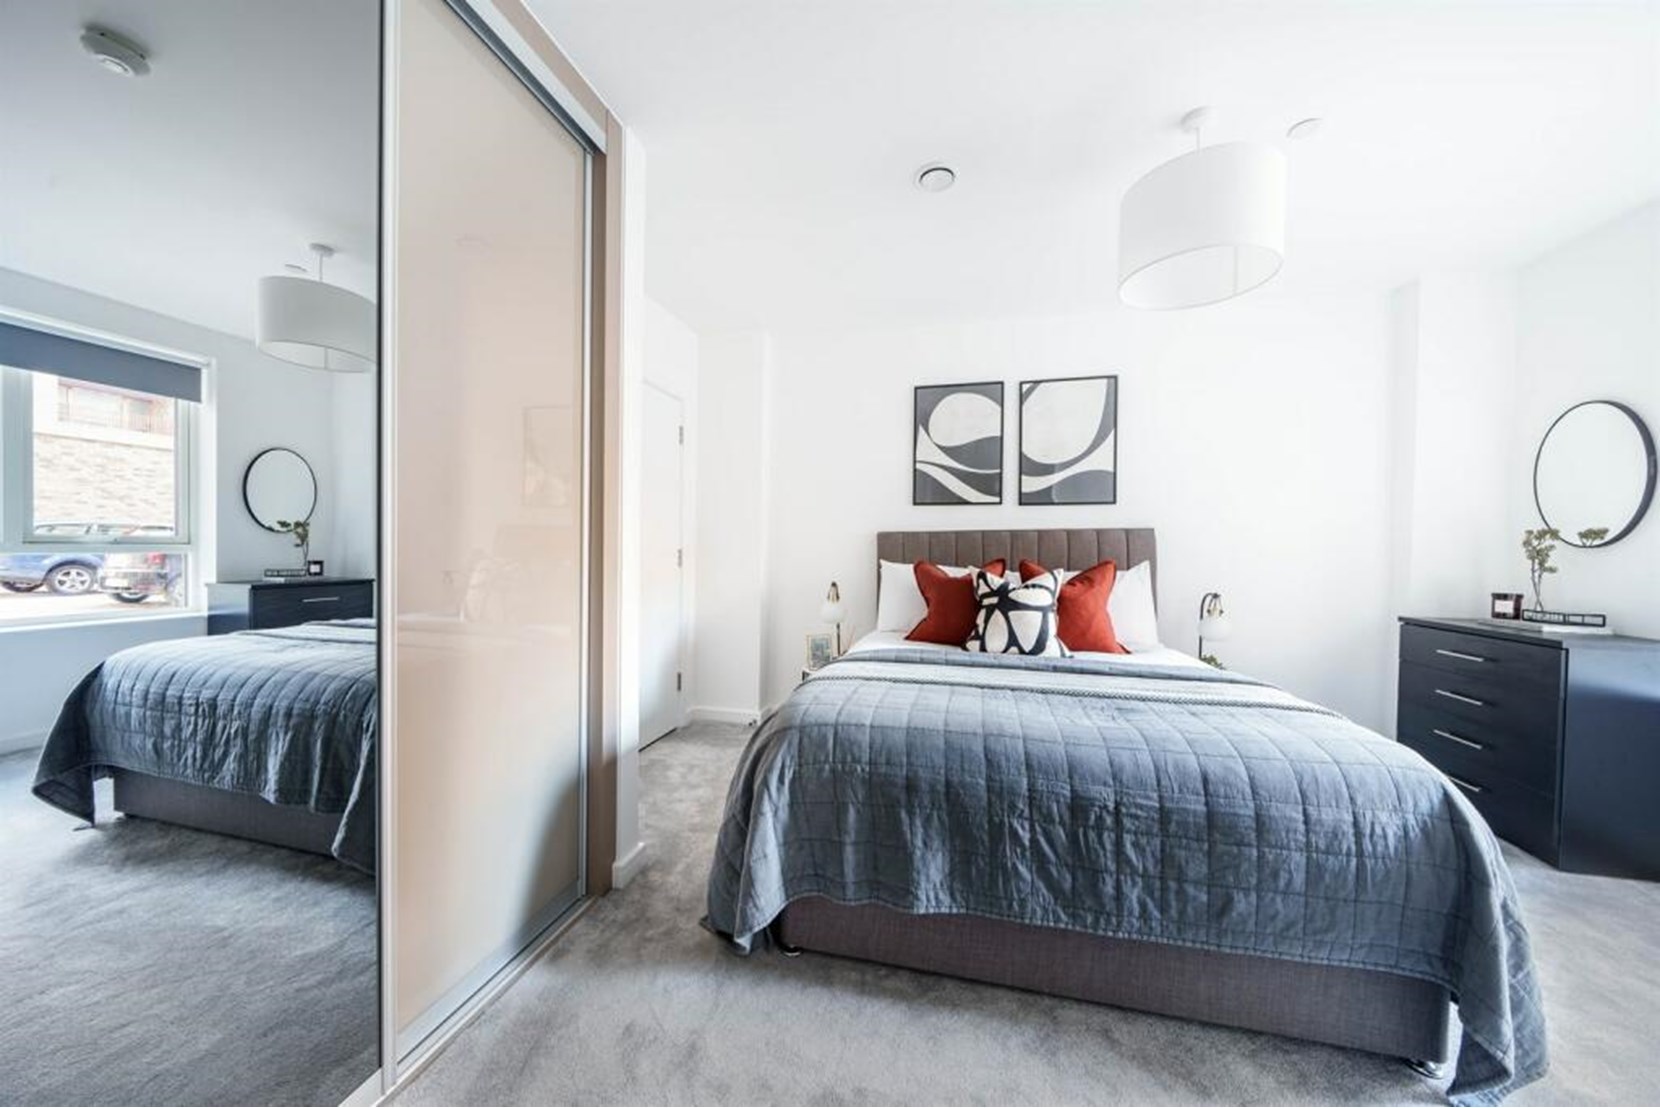 Apartments to Rent by Simple Life London in Ark Soane, Ealing, W3, The Jasper bedroom